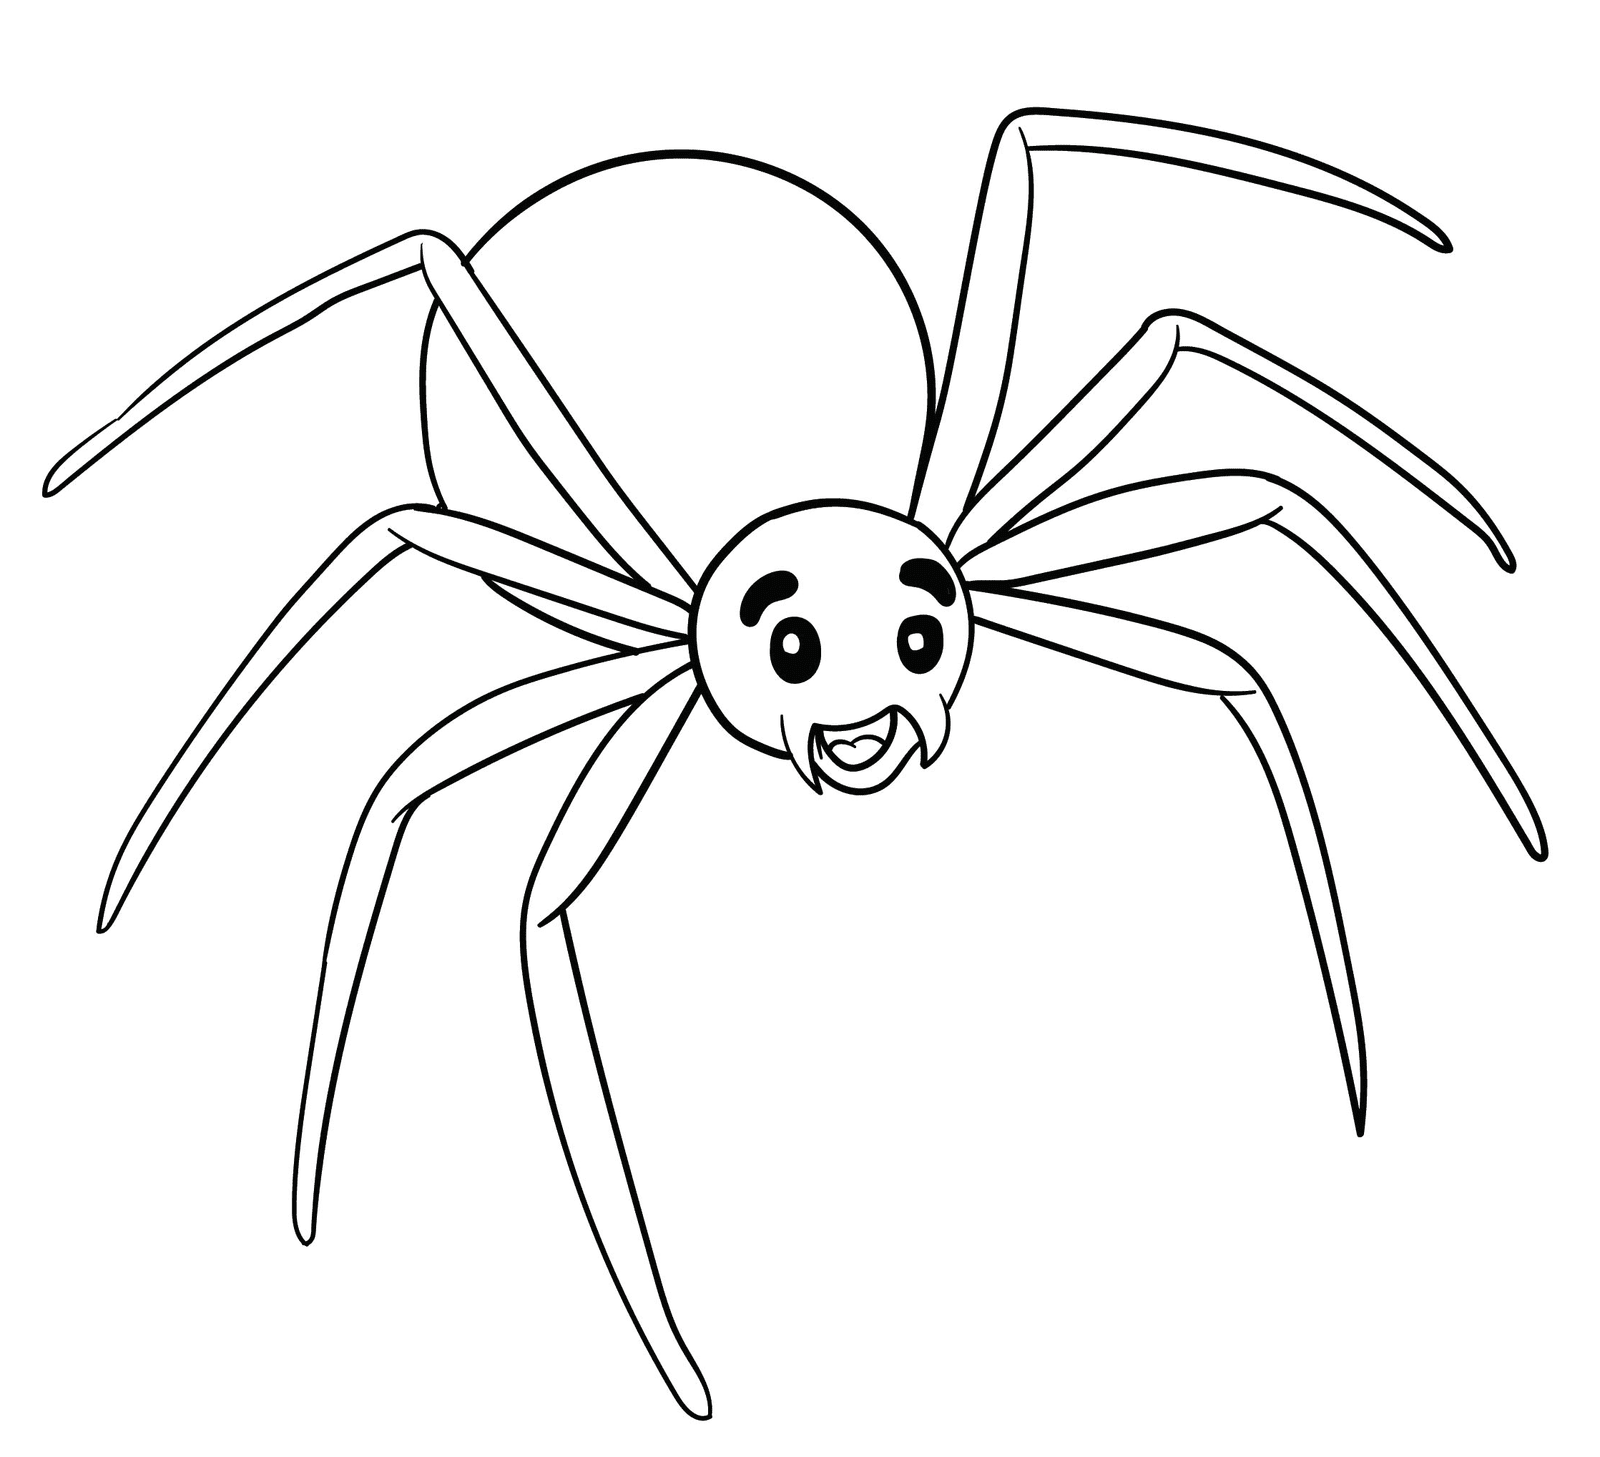 Spider coloring pages printable for free download